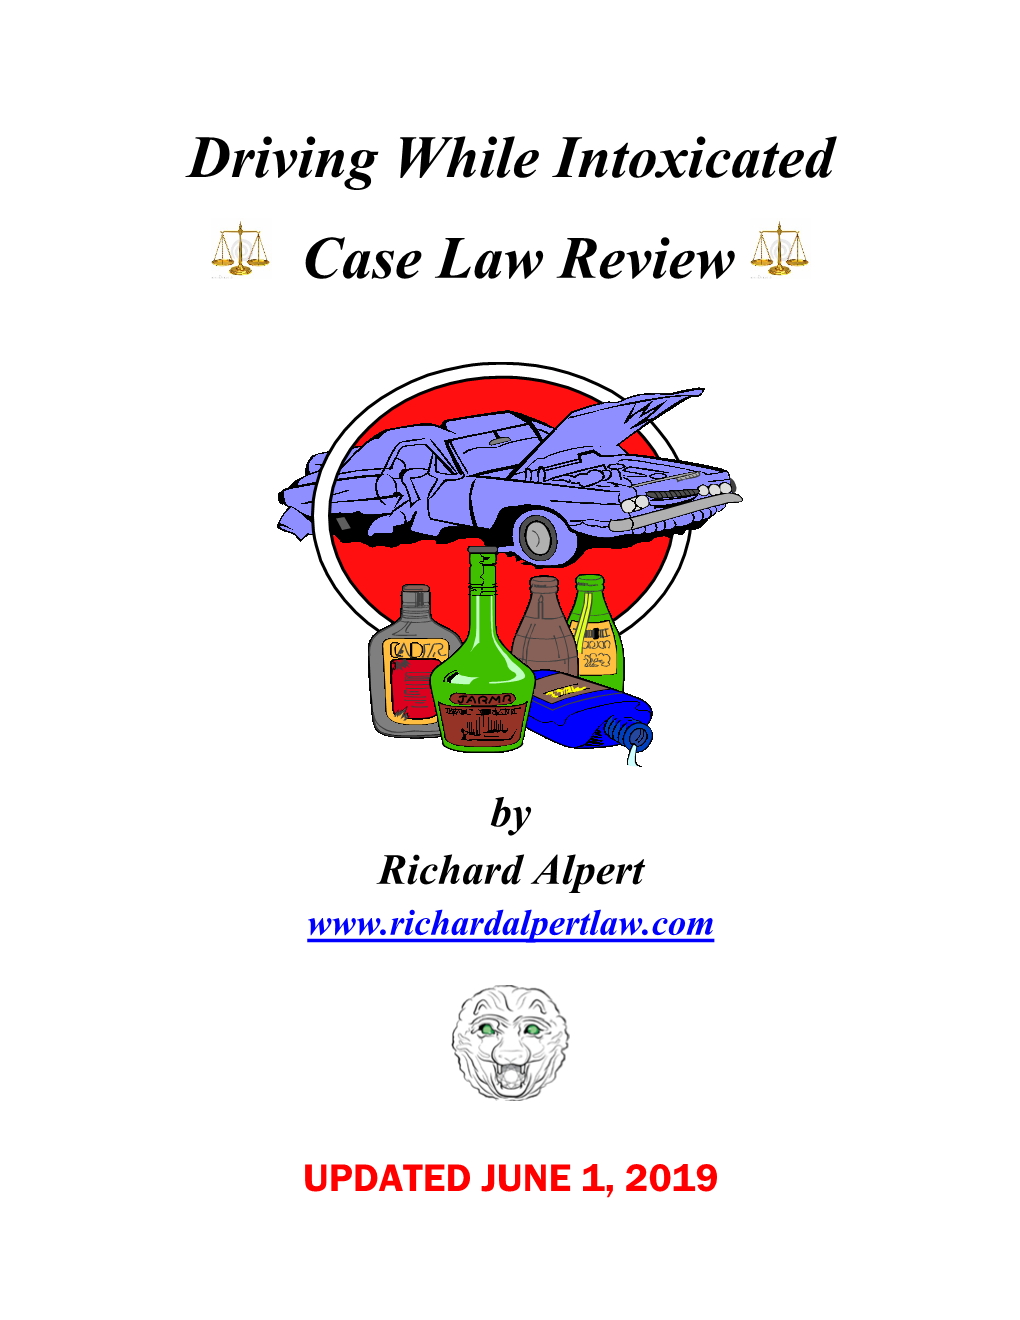 Driving While Intoxicated Case Law Review